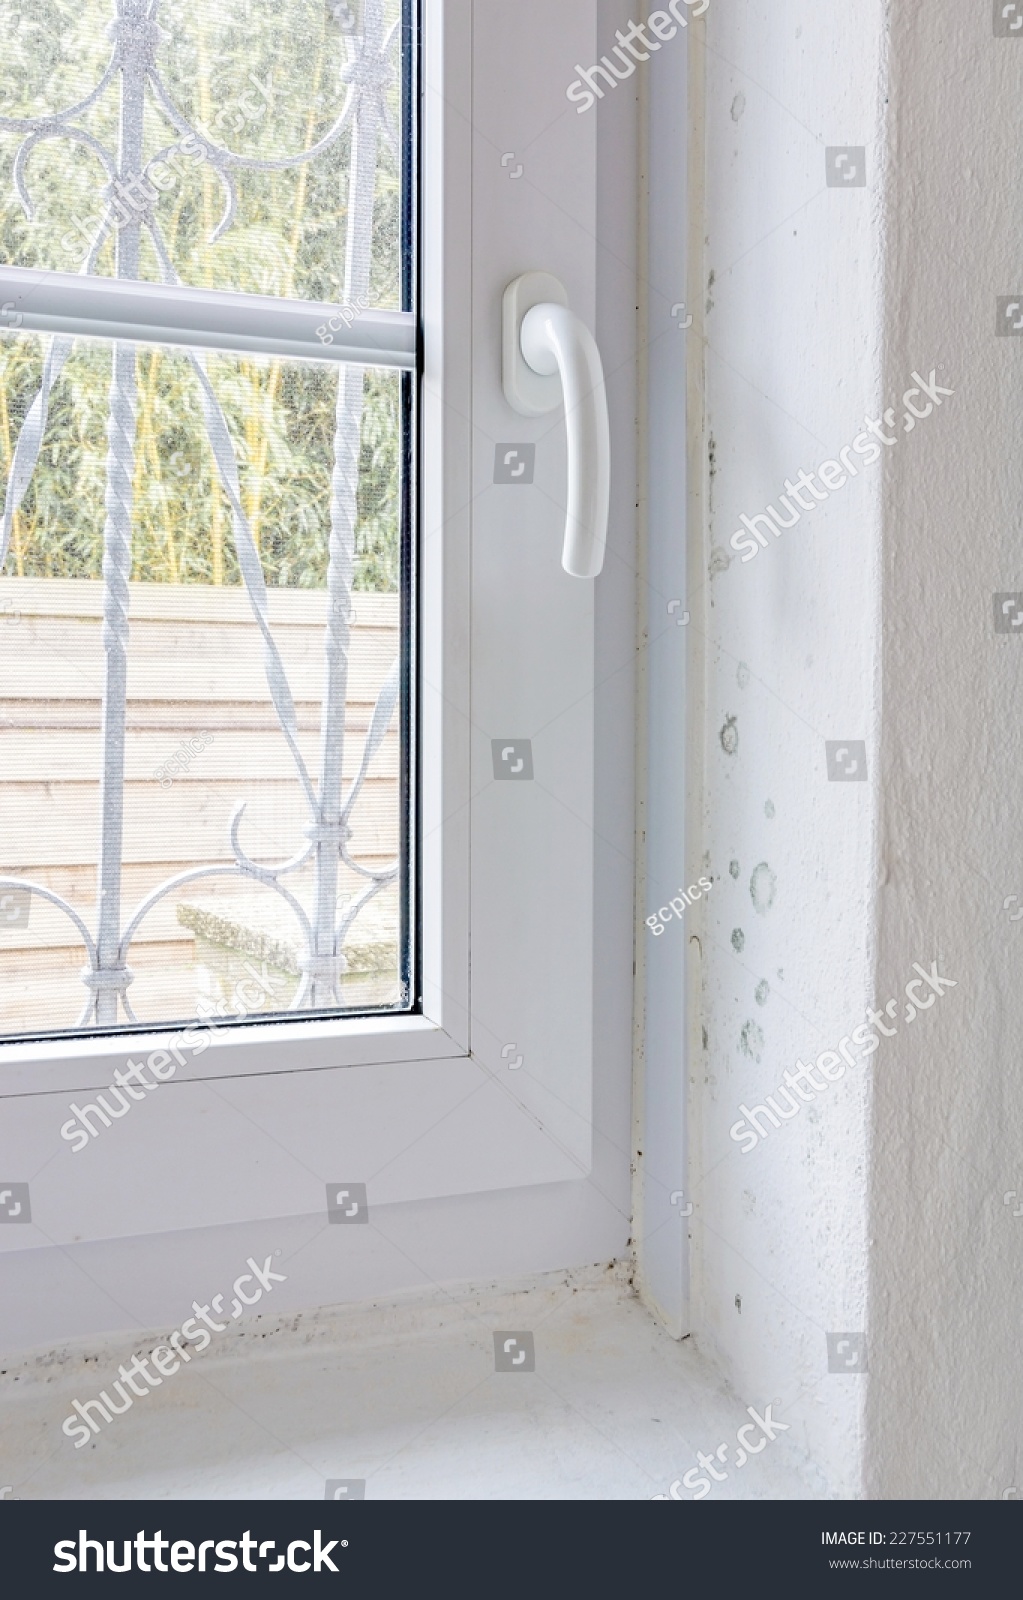 Early Stage Rising Damp Mold On Stock Photo 227551177 - Shutterstock